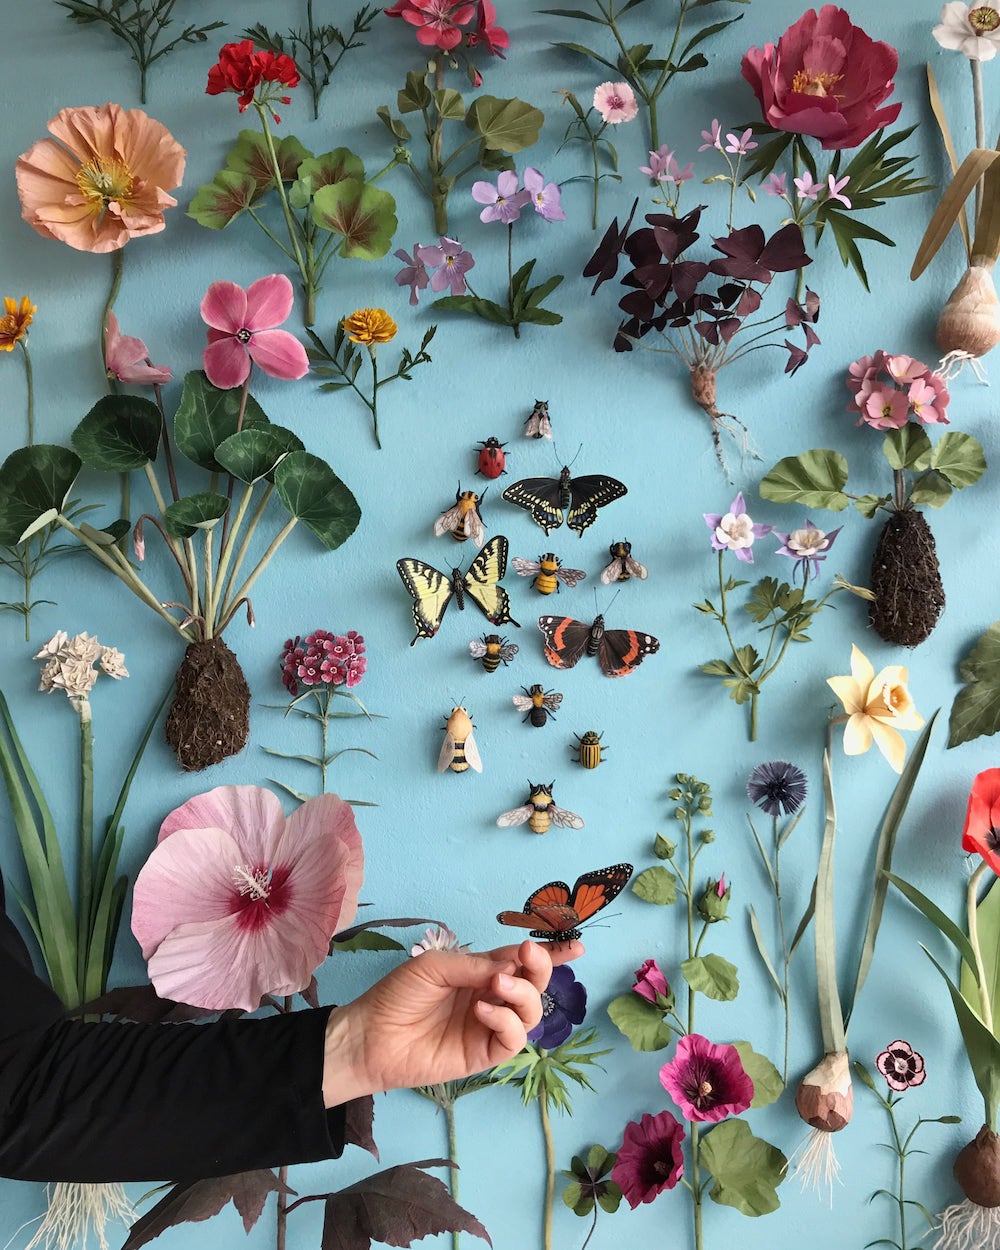 Woodlucker Re-Creates the Botanical World in Paper Ann Wood Paper Flowers